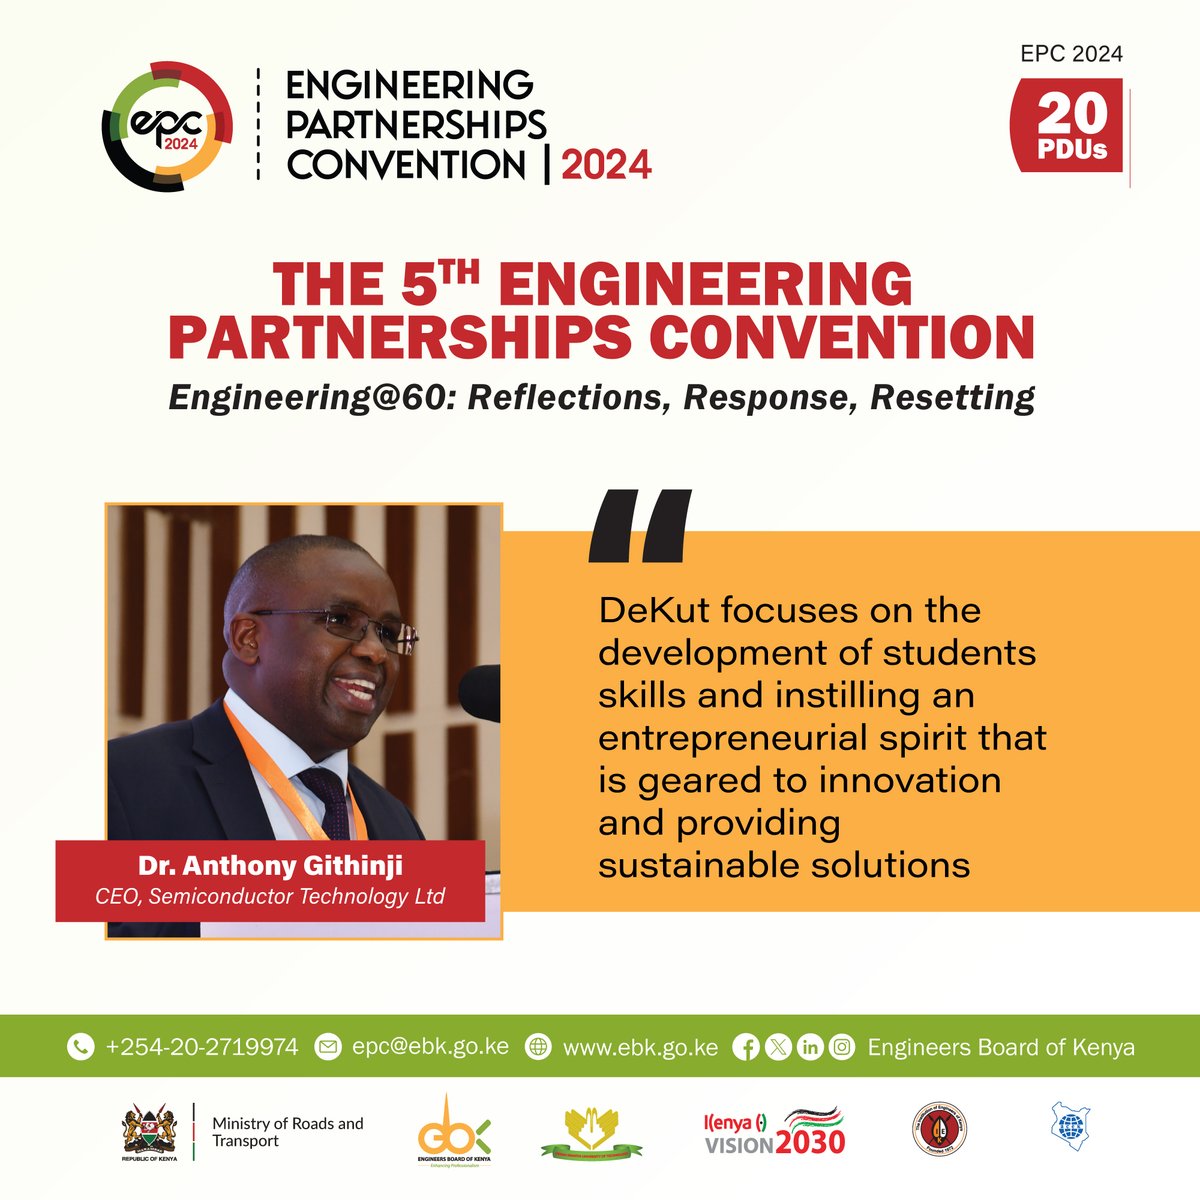 'DeKut focuses on the development of students skills and instilling an entrepreneurial spirit that is geared to innovation and providing sustainable solutions.' - Eng. Prof. Peter Muchiri #PartnershipsAndCollaborations #EngieeringStandardsKe #EngineeringSustainableSolutions